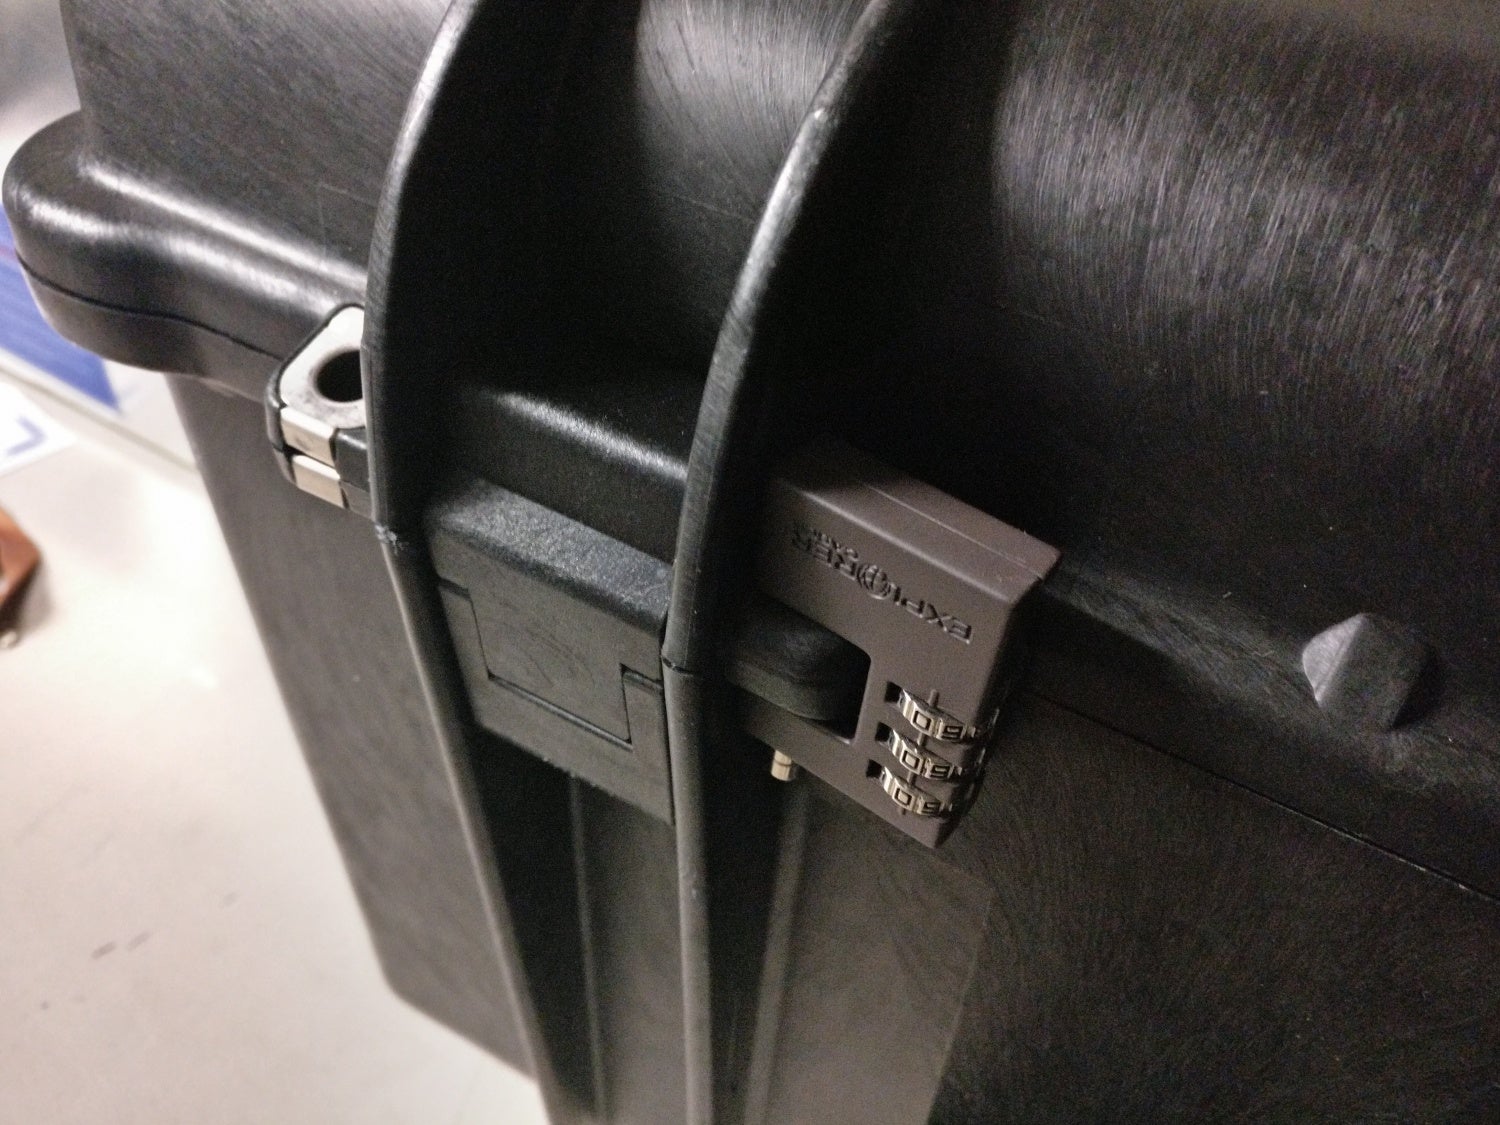 Black combination padlock affixed to a plastic hasp